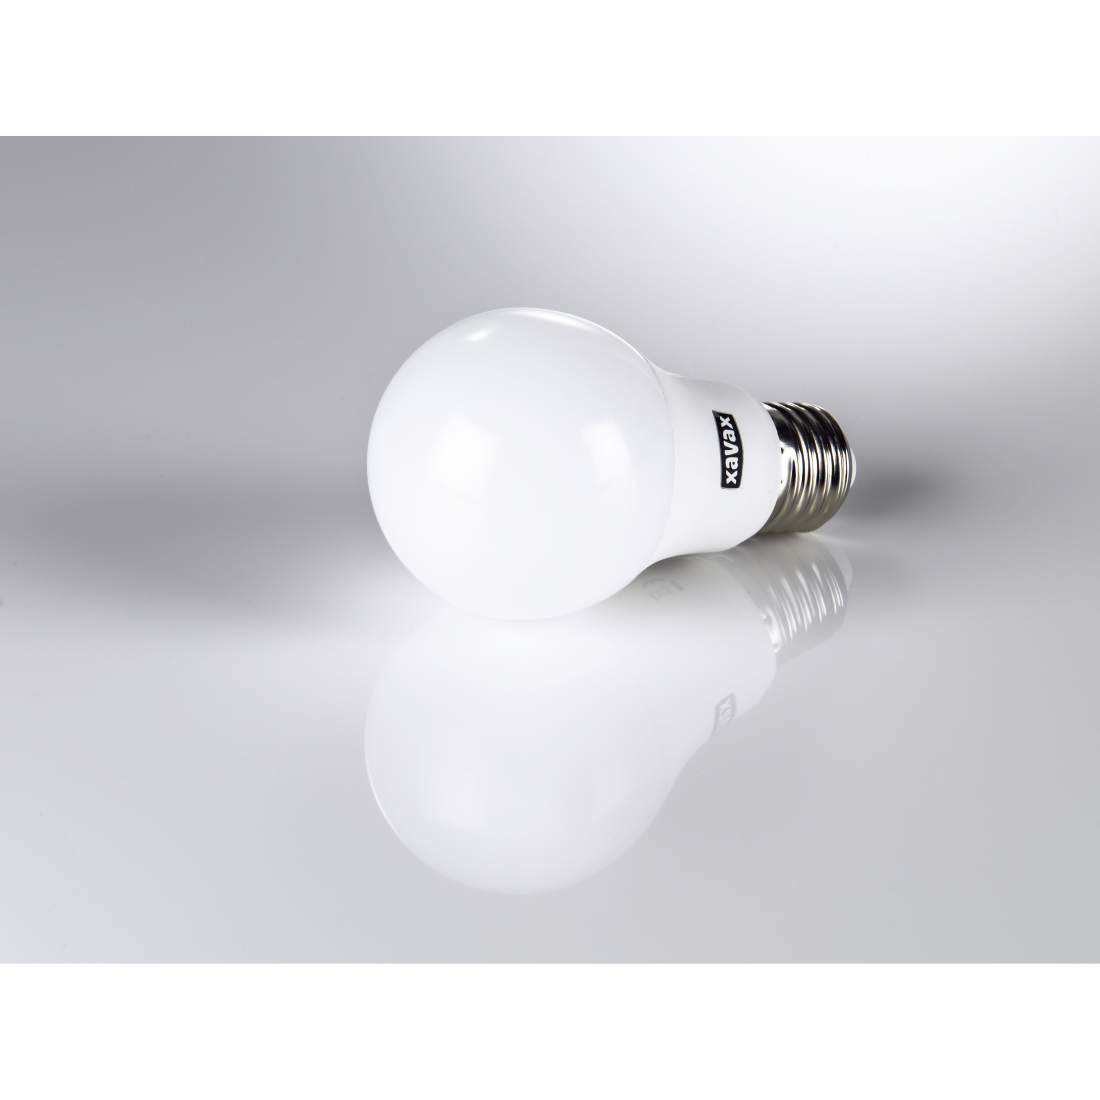 abx3 High-Res Image 3 - Xavax, LED Bulb, E27, 806lm replaces 60W, incandescent bulb, daylight